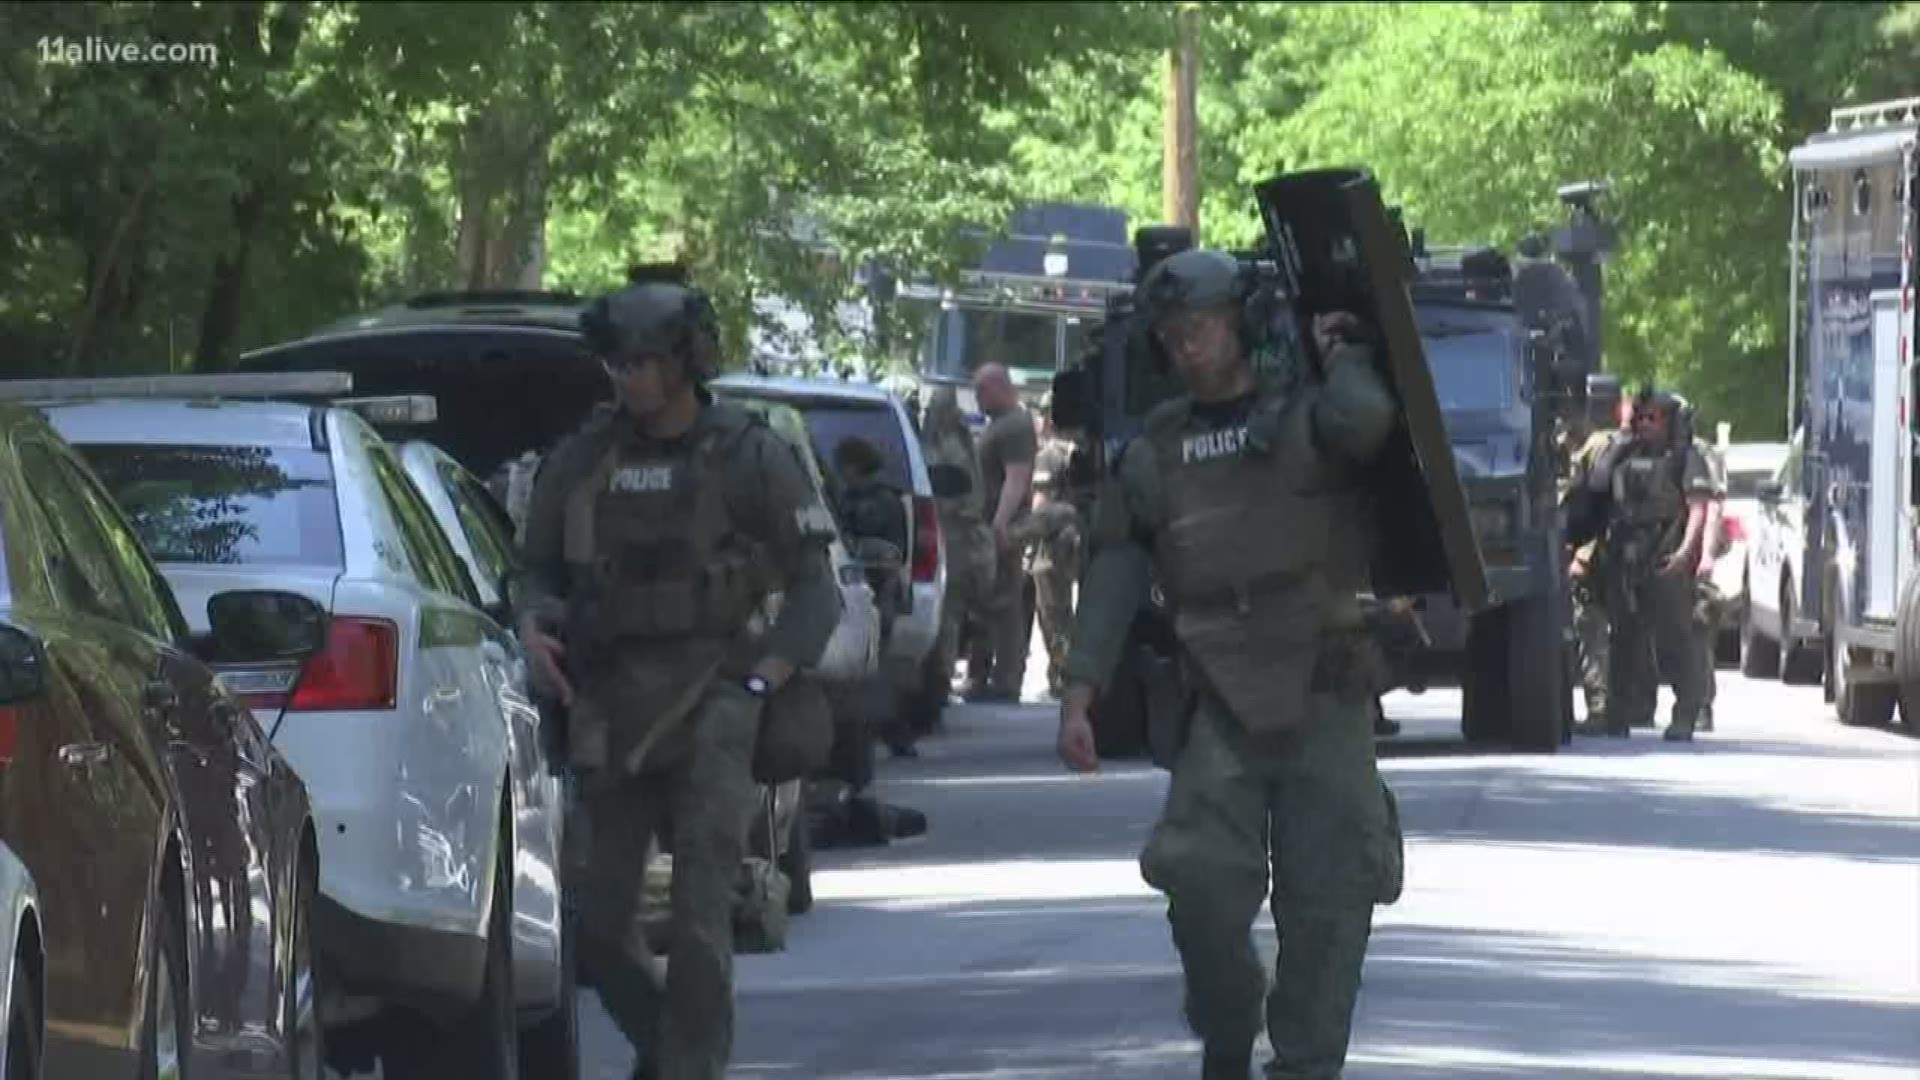 The standoff lasted roughly 2 hours before the Gwinnett County man was arrested.